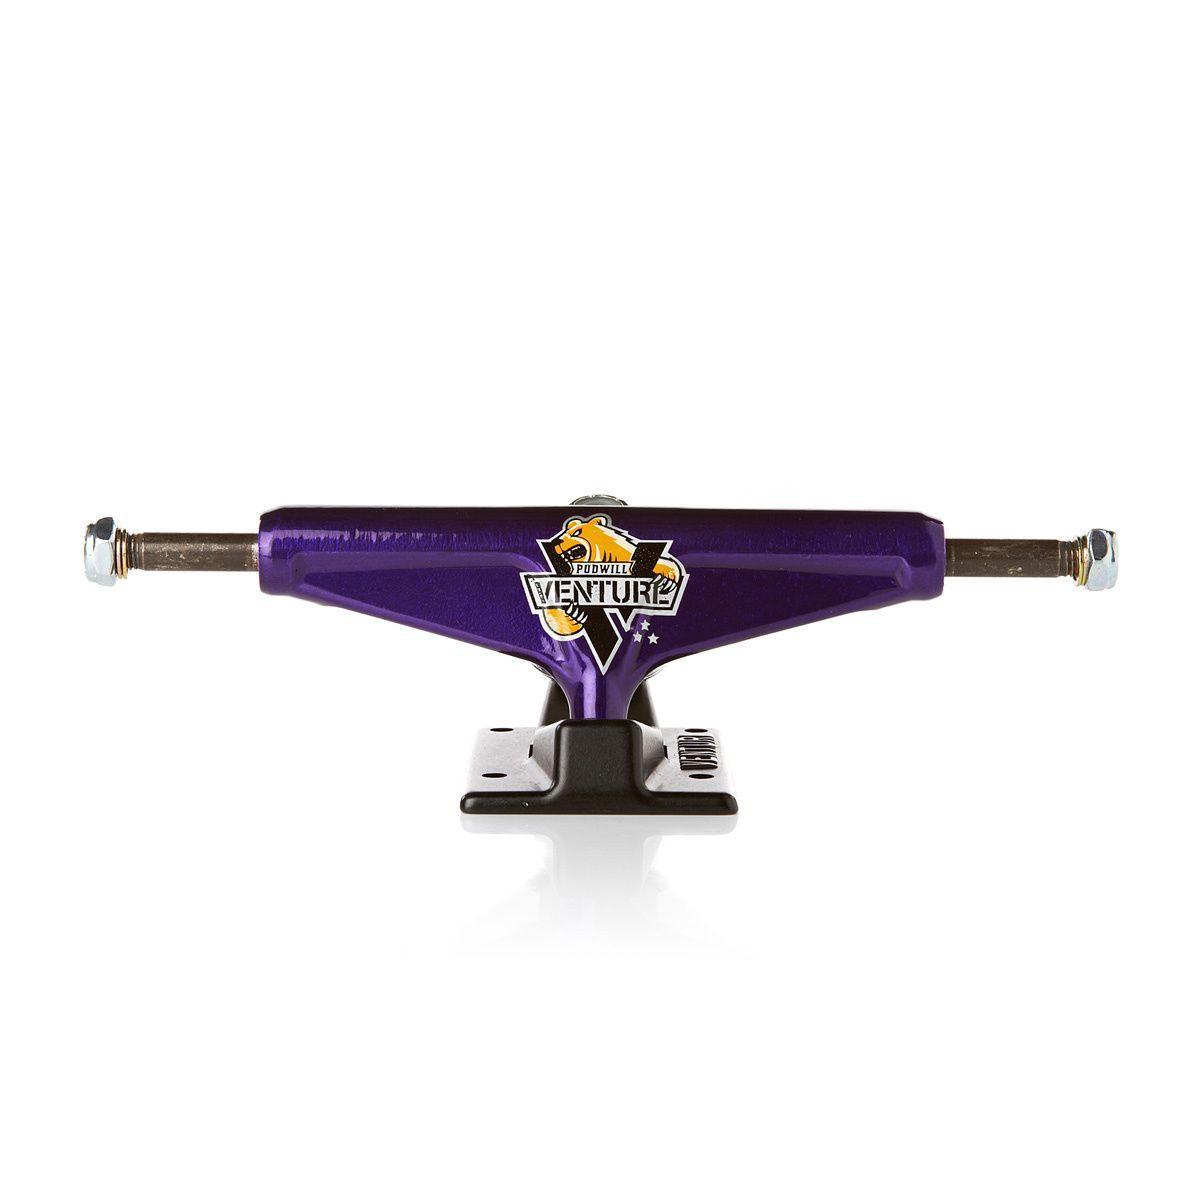 Venture Trucks Grizzly Logo - Venture V Light Low Forged Pudwill Grizzly 5.25 Truck - Purple/Black ...